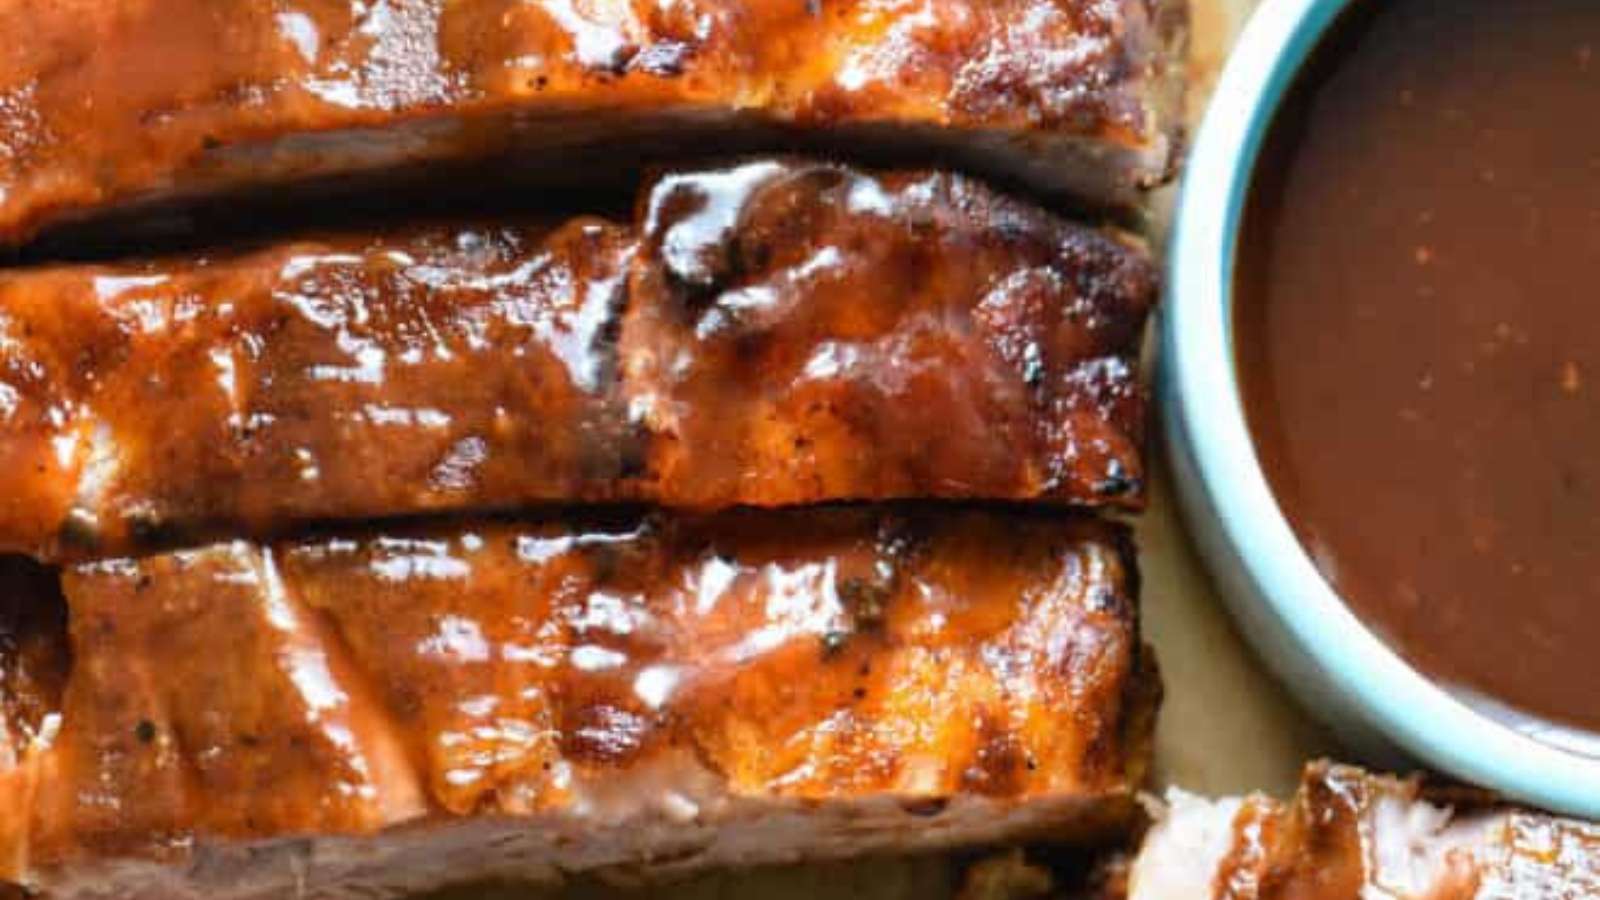 BBQ ribs with BBQ sauce on a wooden cutting board.